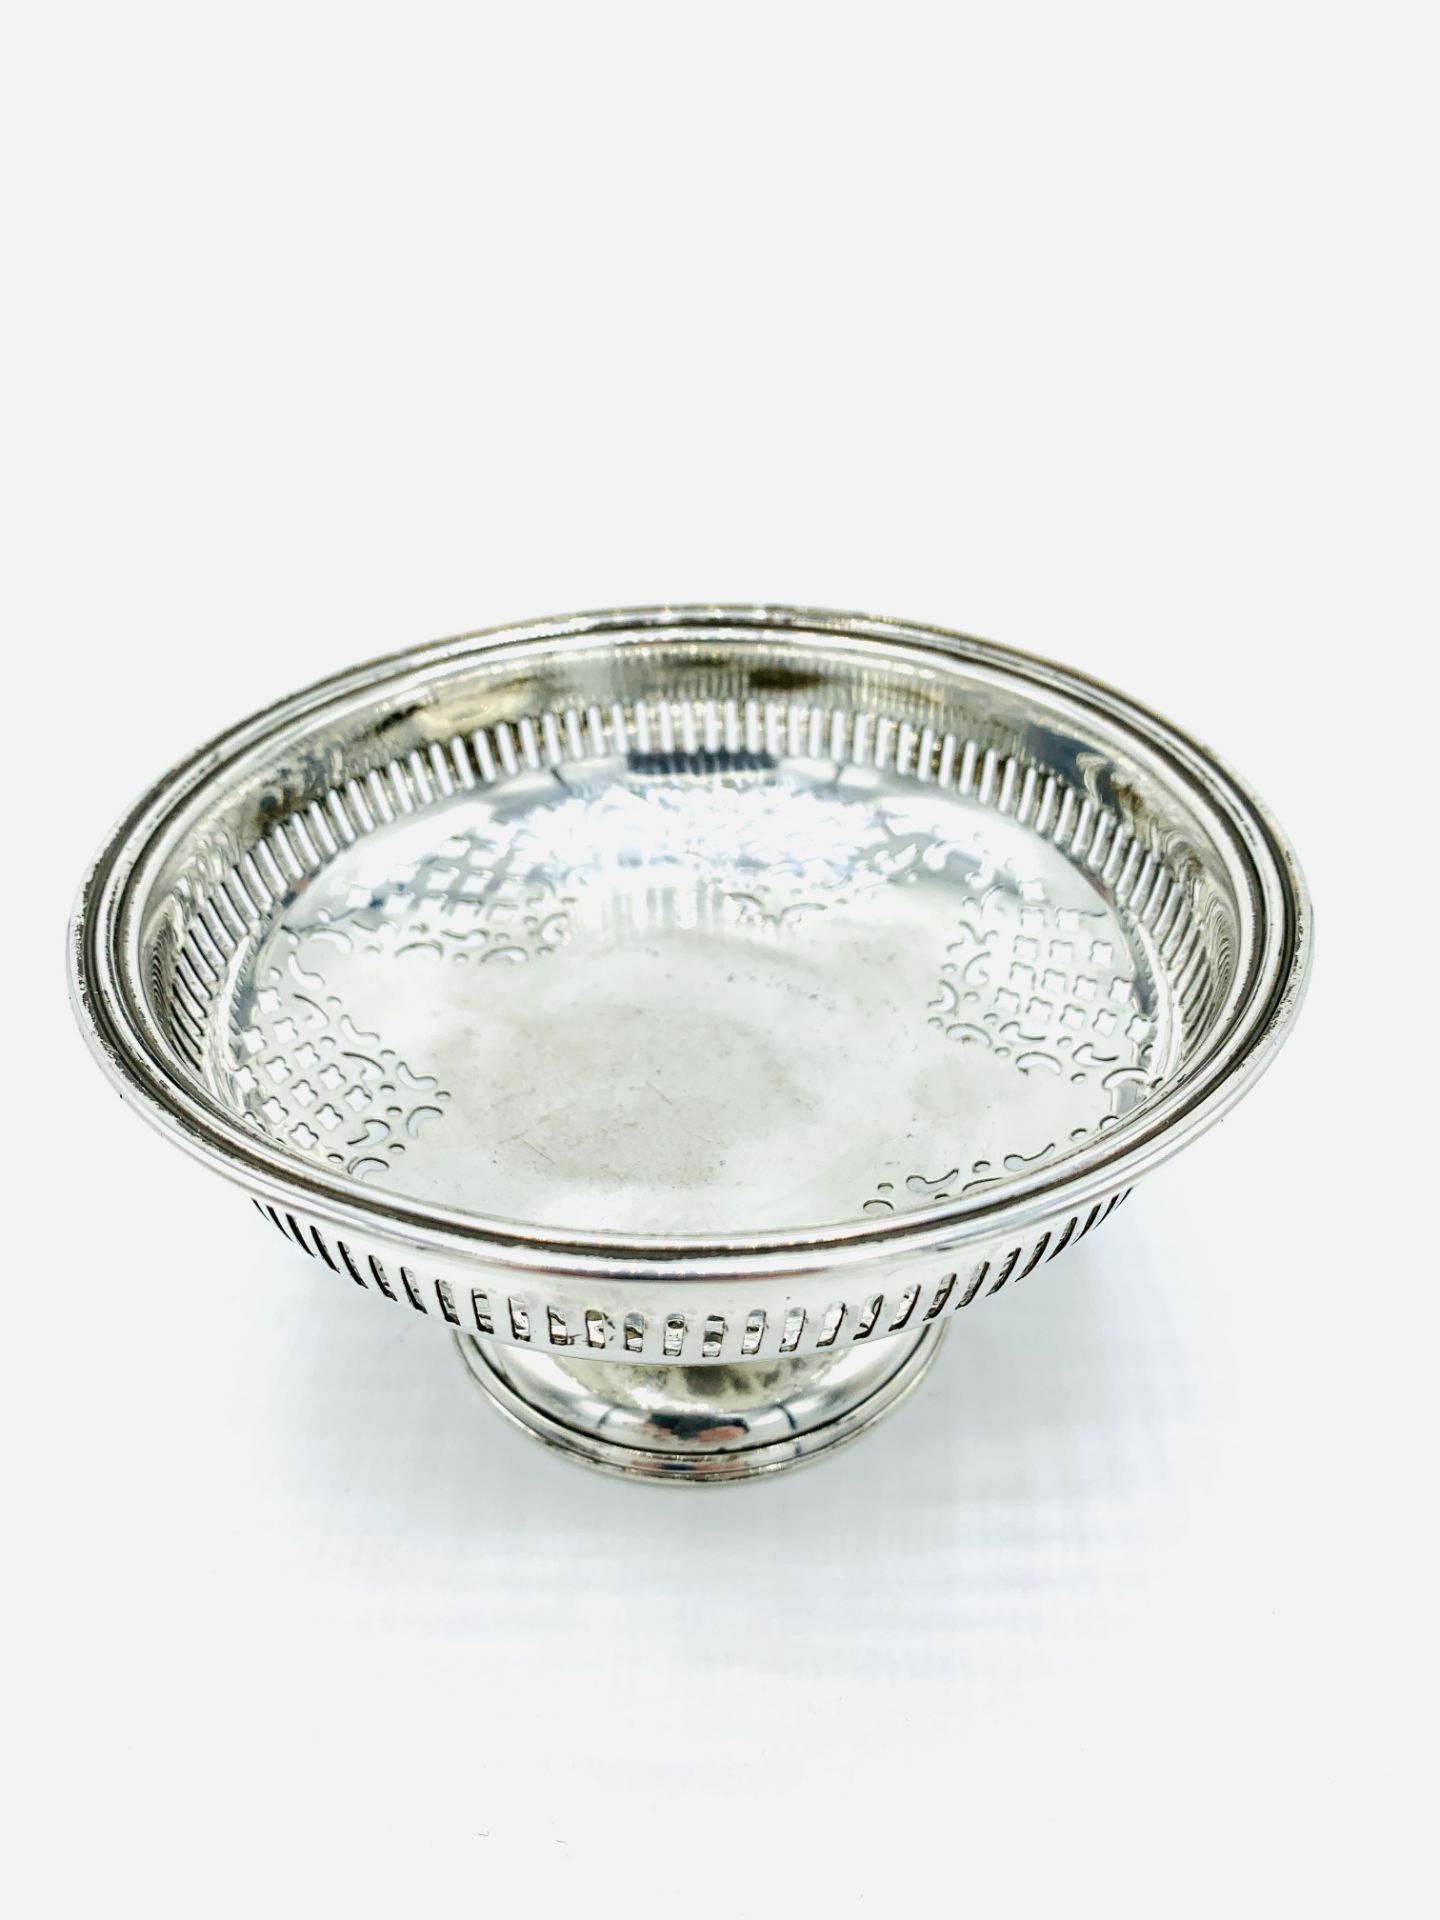 Sterling silver footed dish with pierced decoration to the rim by Emile Viners. - Image 2 of 3